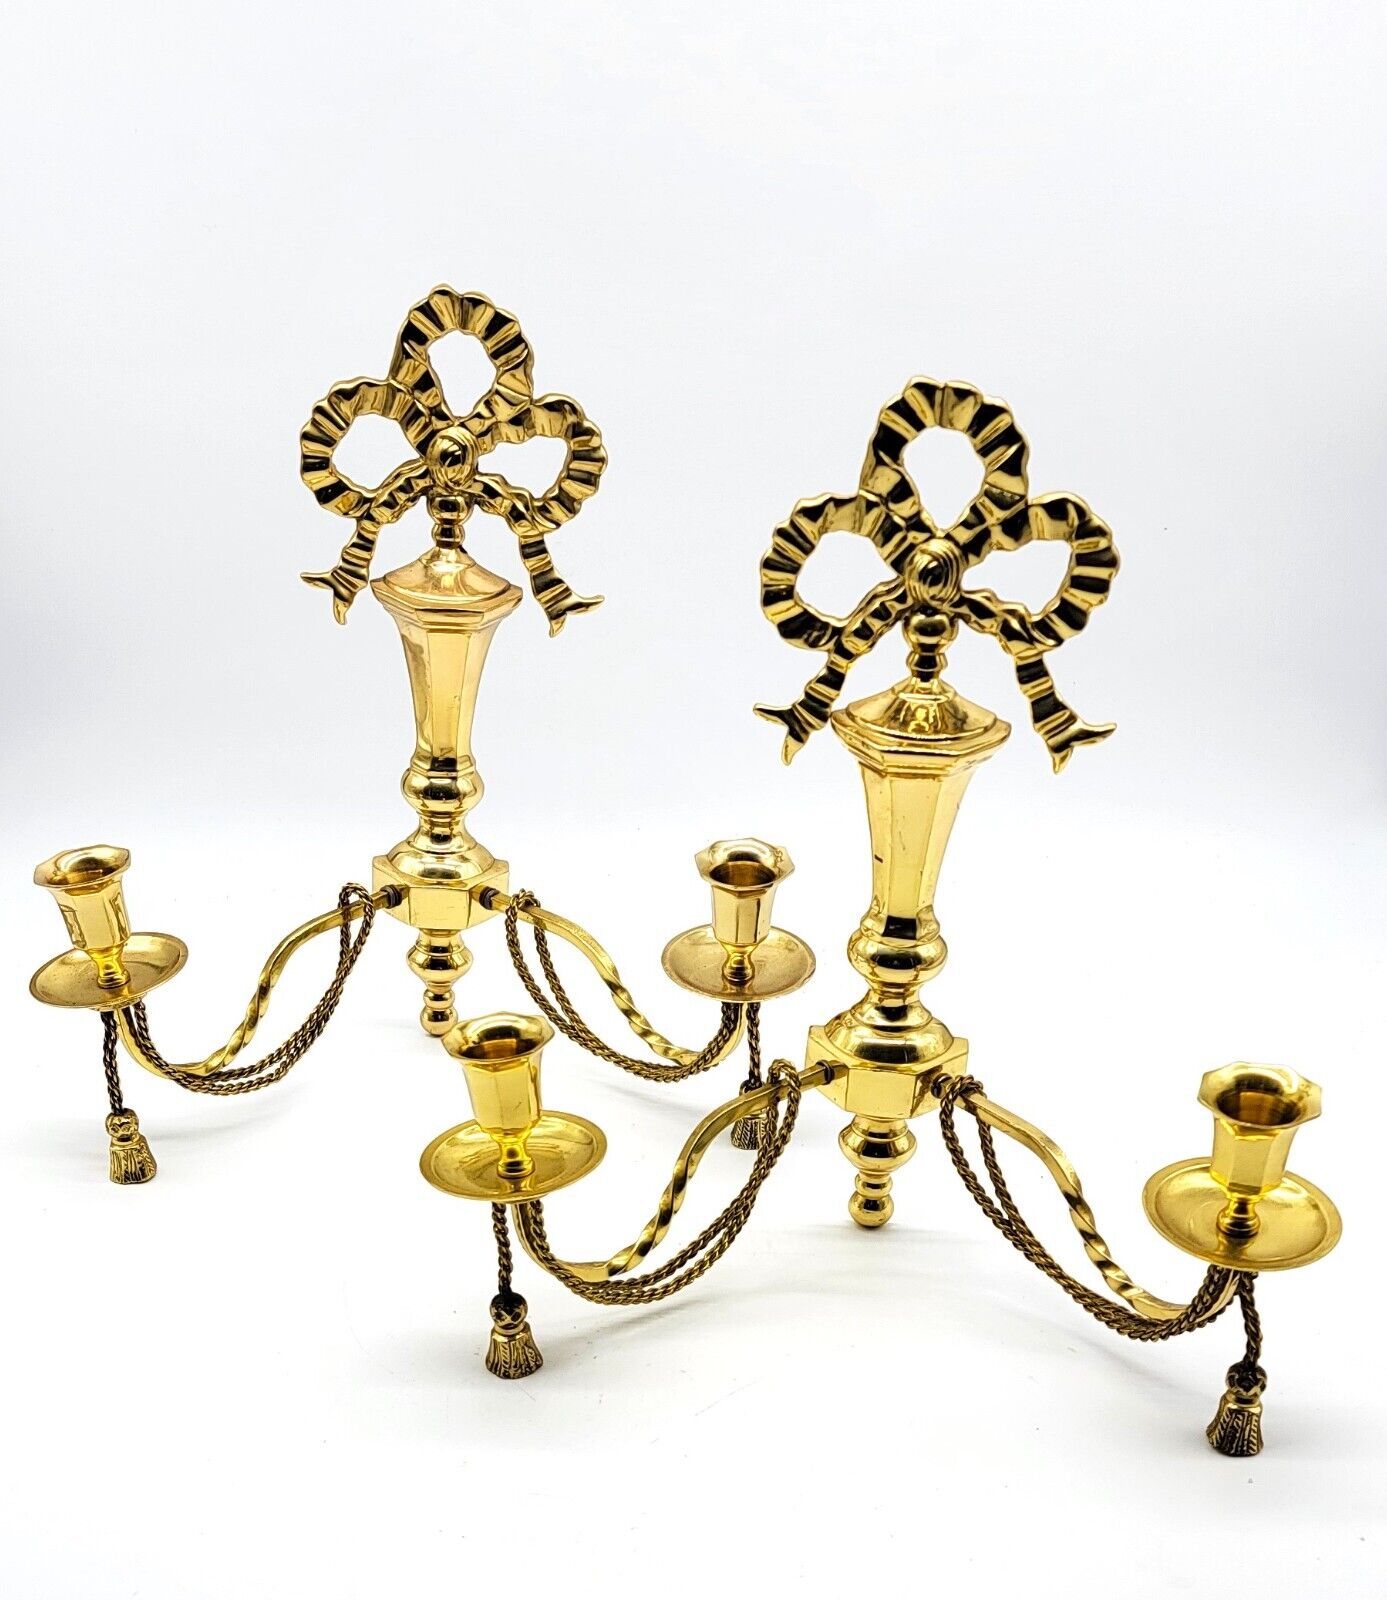 Pair of Lacquered Double Armed Brass Wall Mounted Candleholders Braided Rope MCM